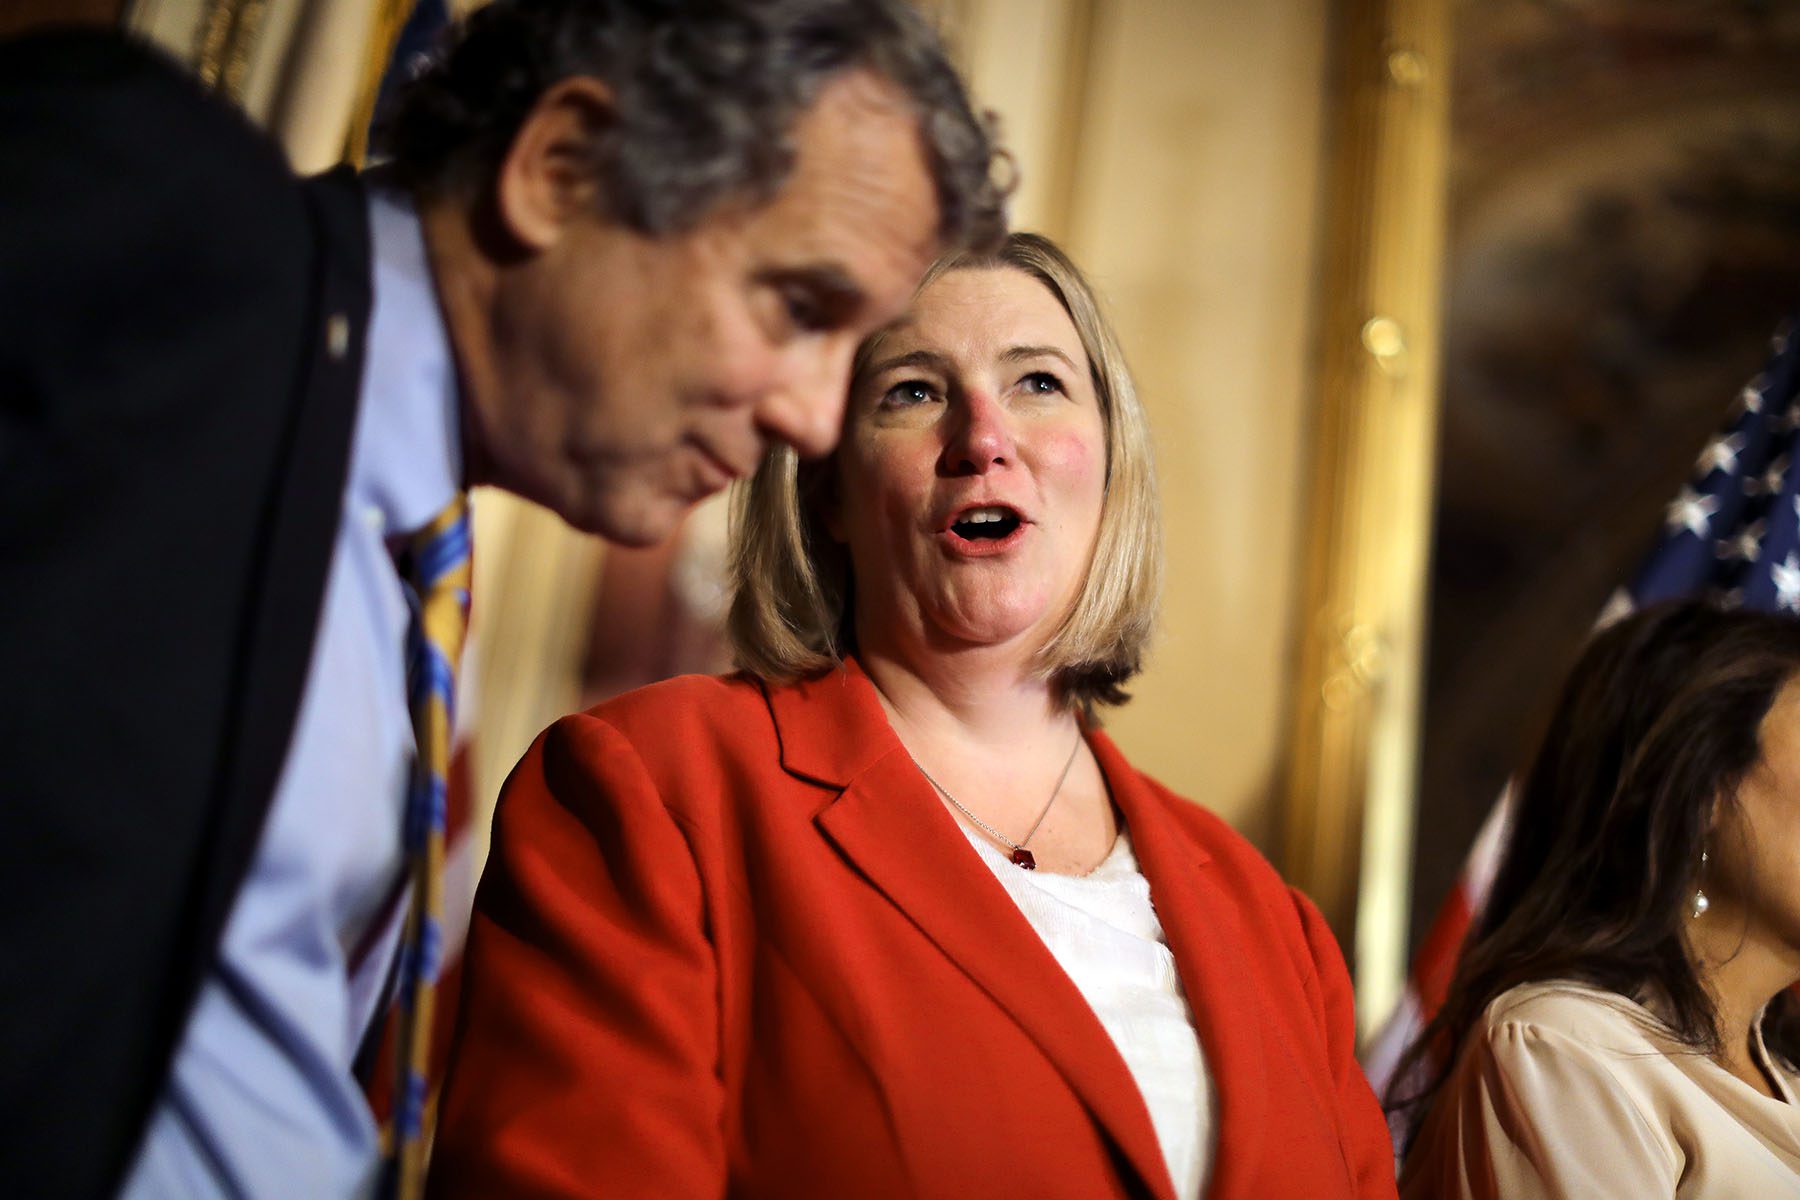 Nan Whaley speaks to Sen. Sherrod Brown during a press conference on Capitol Hill.